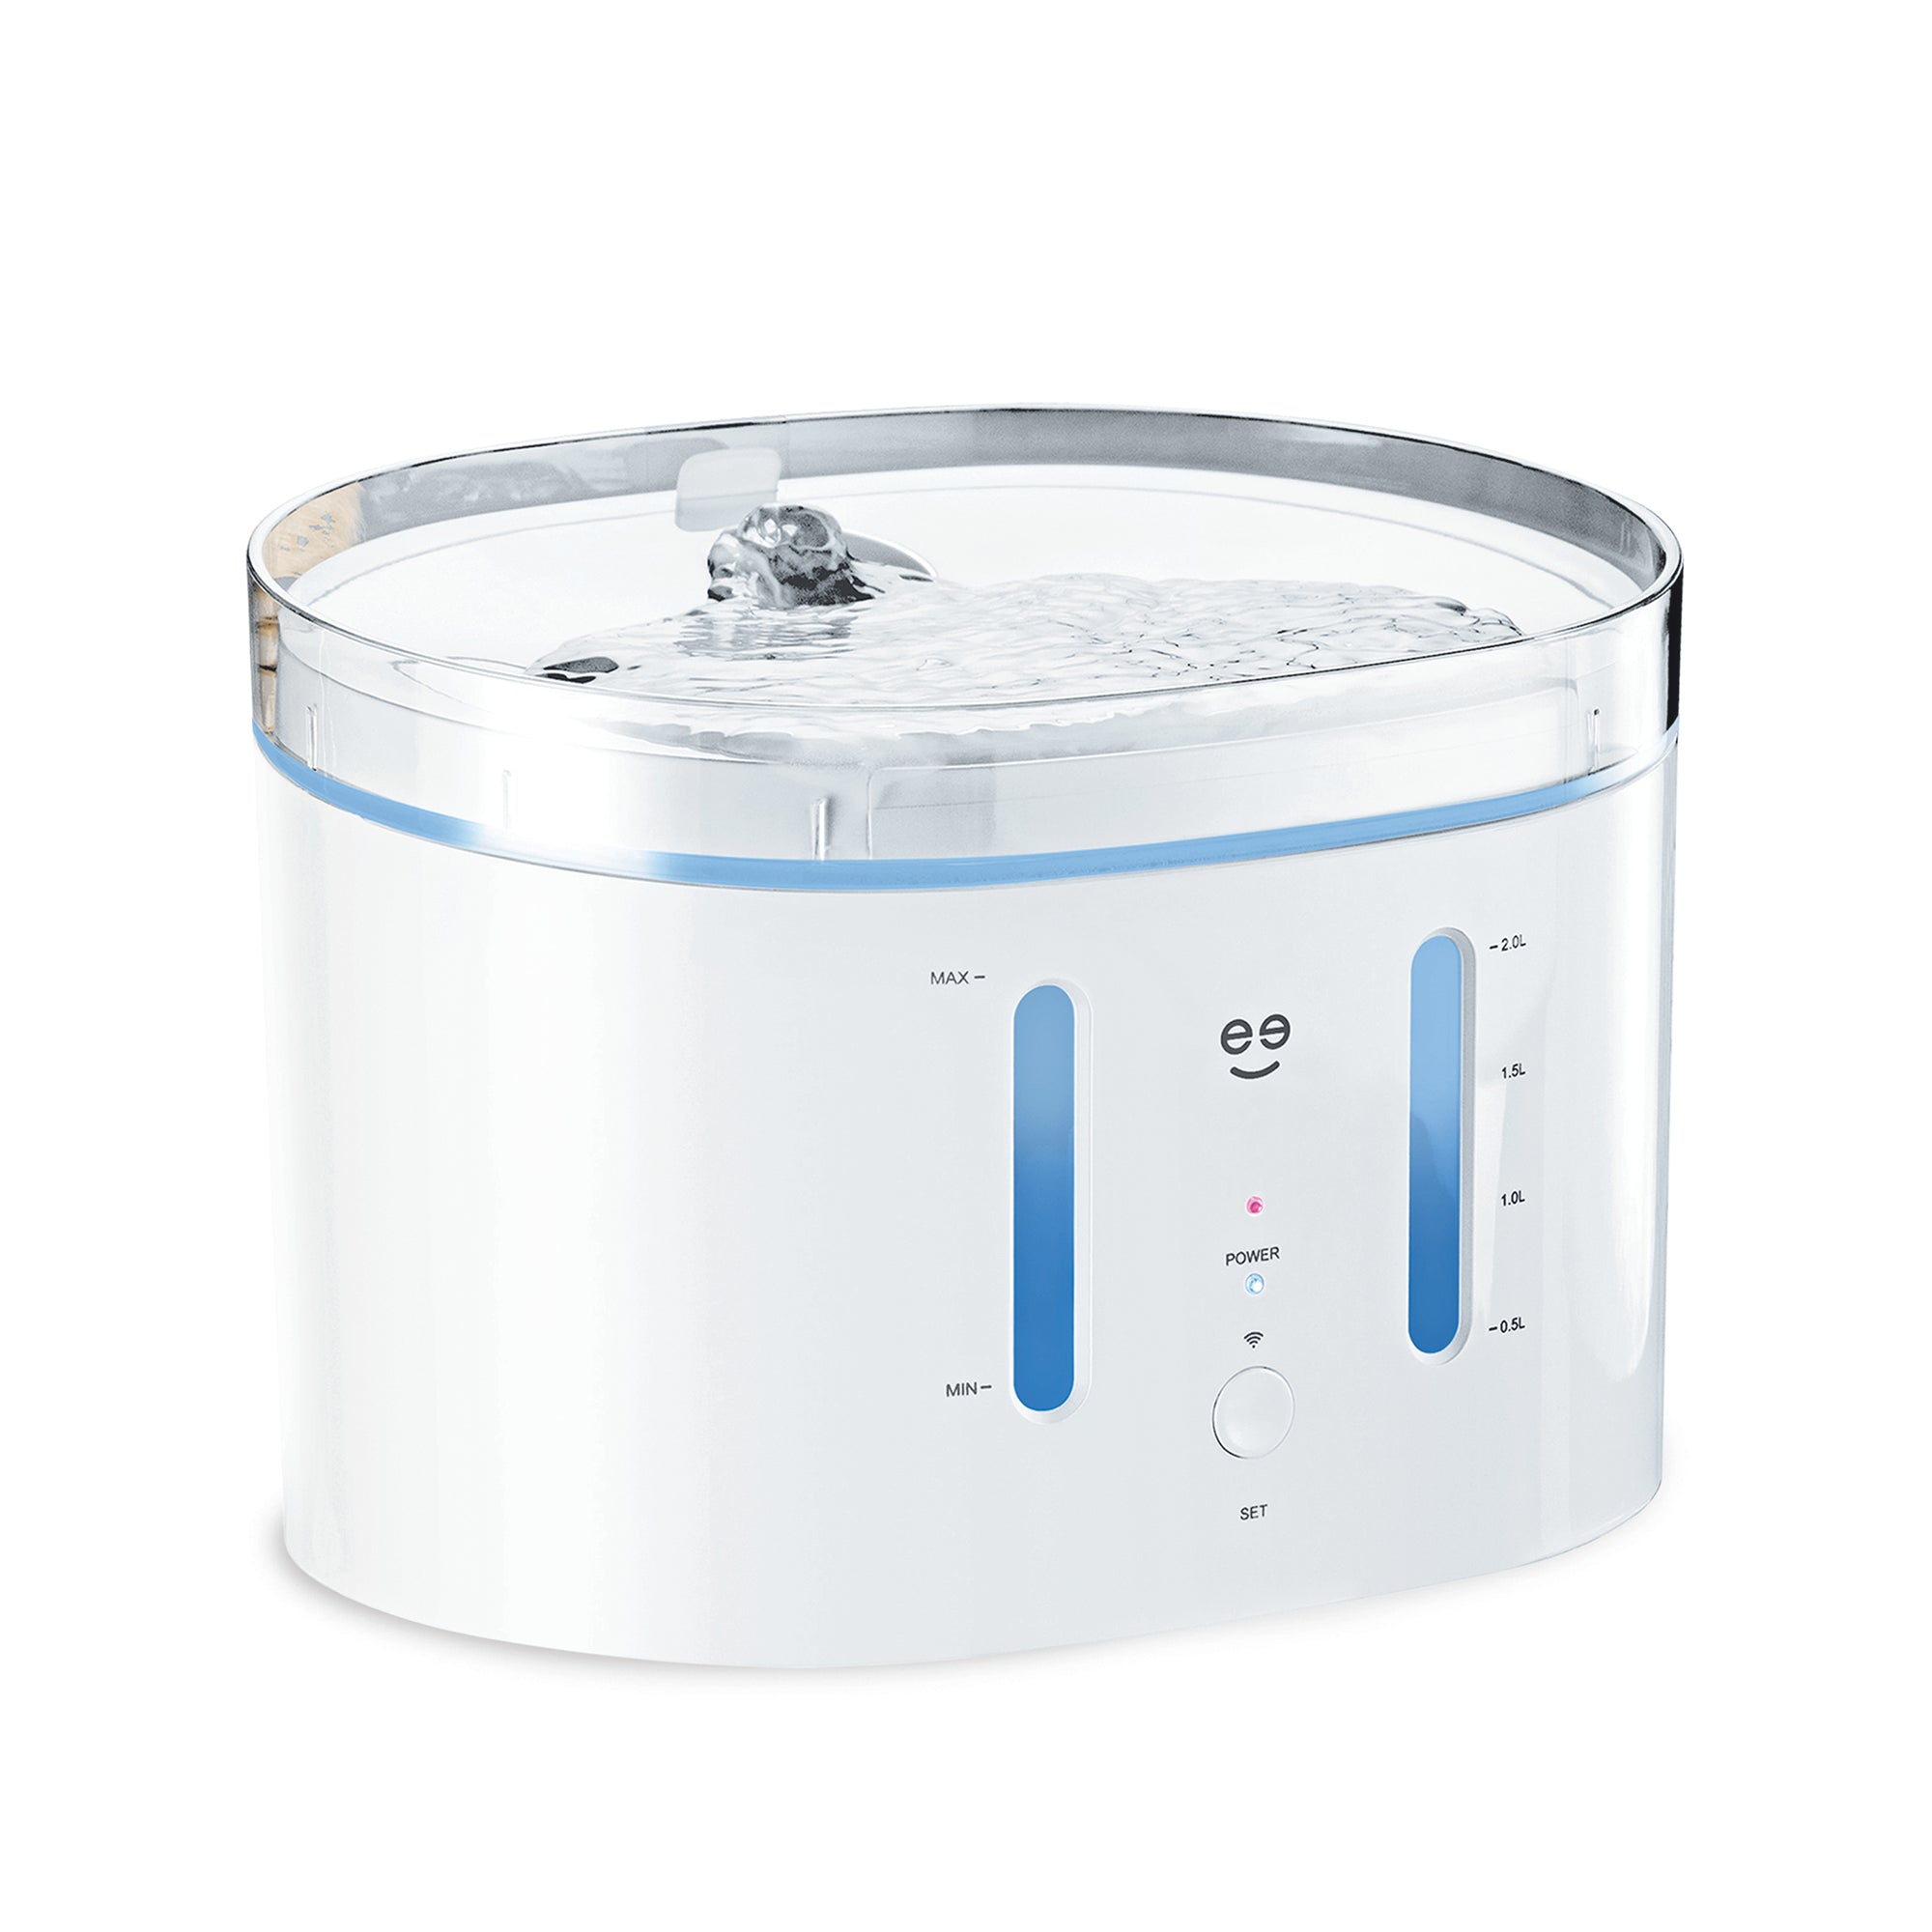 Geeni Pet Feeder Automatic Feeder with Camera